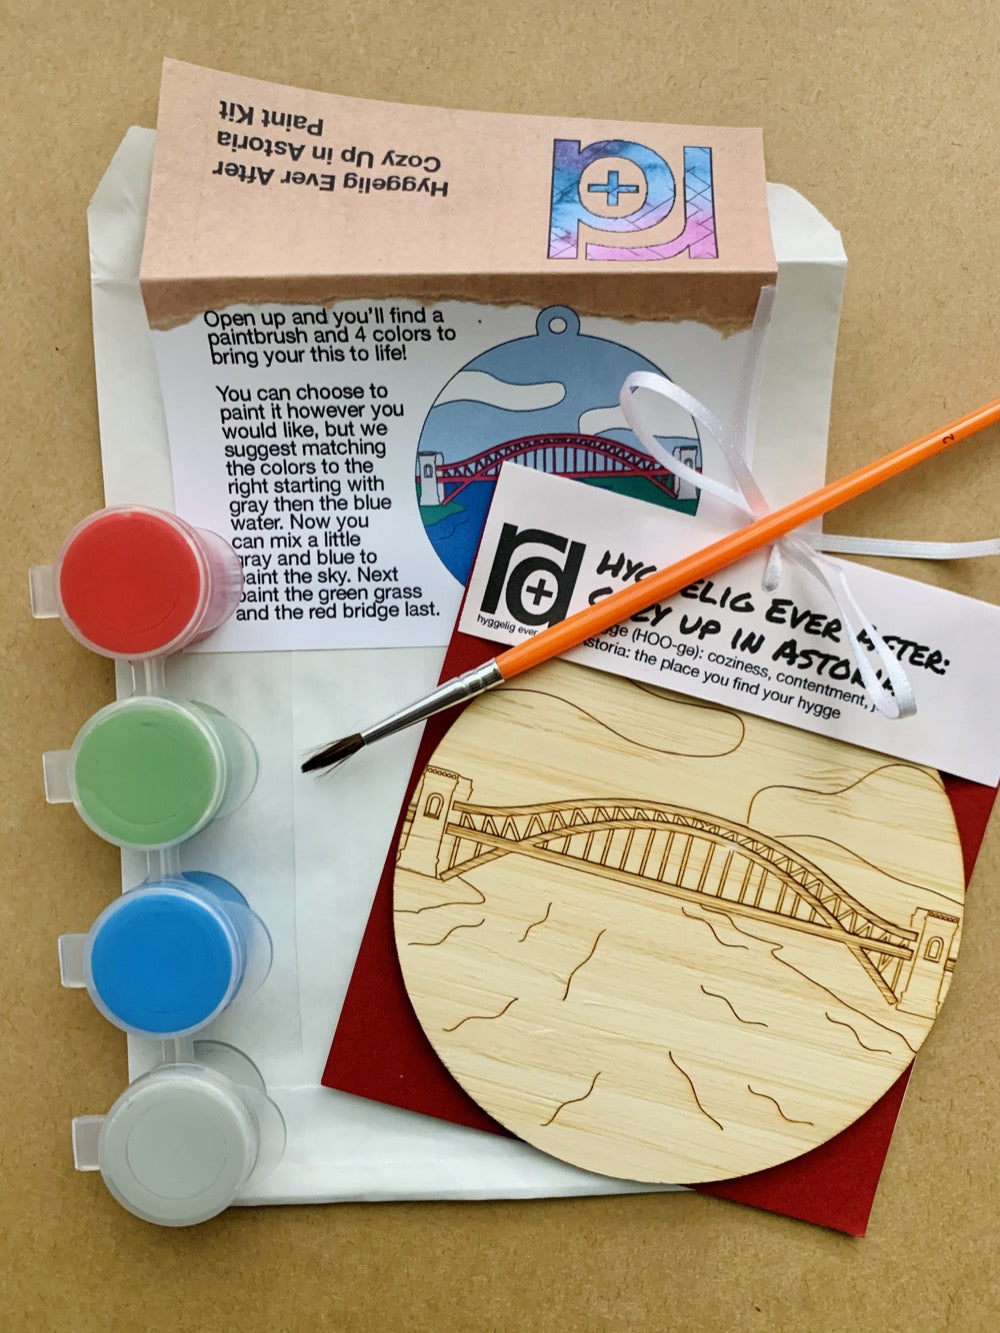 Shown laying on craft paper is the packaging and contents of this DIY Paint Kit. There is a paper envelope with instructions, a paintbrush, a set of 4 paint wells and a wall hanging with a laser cut NYC landmark. 